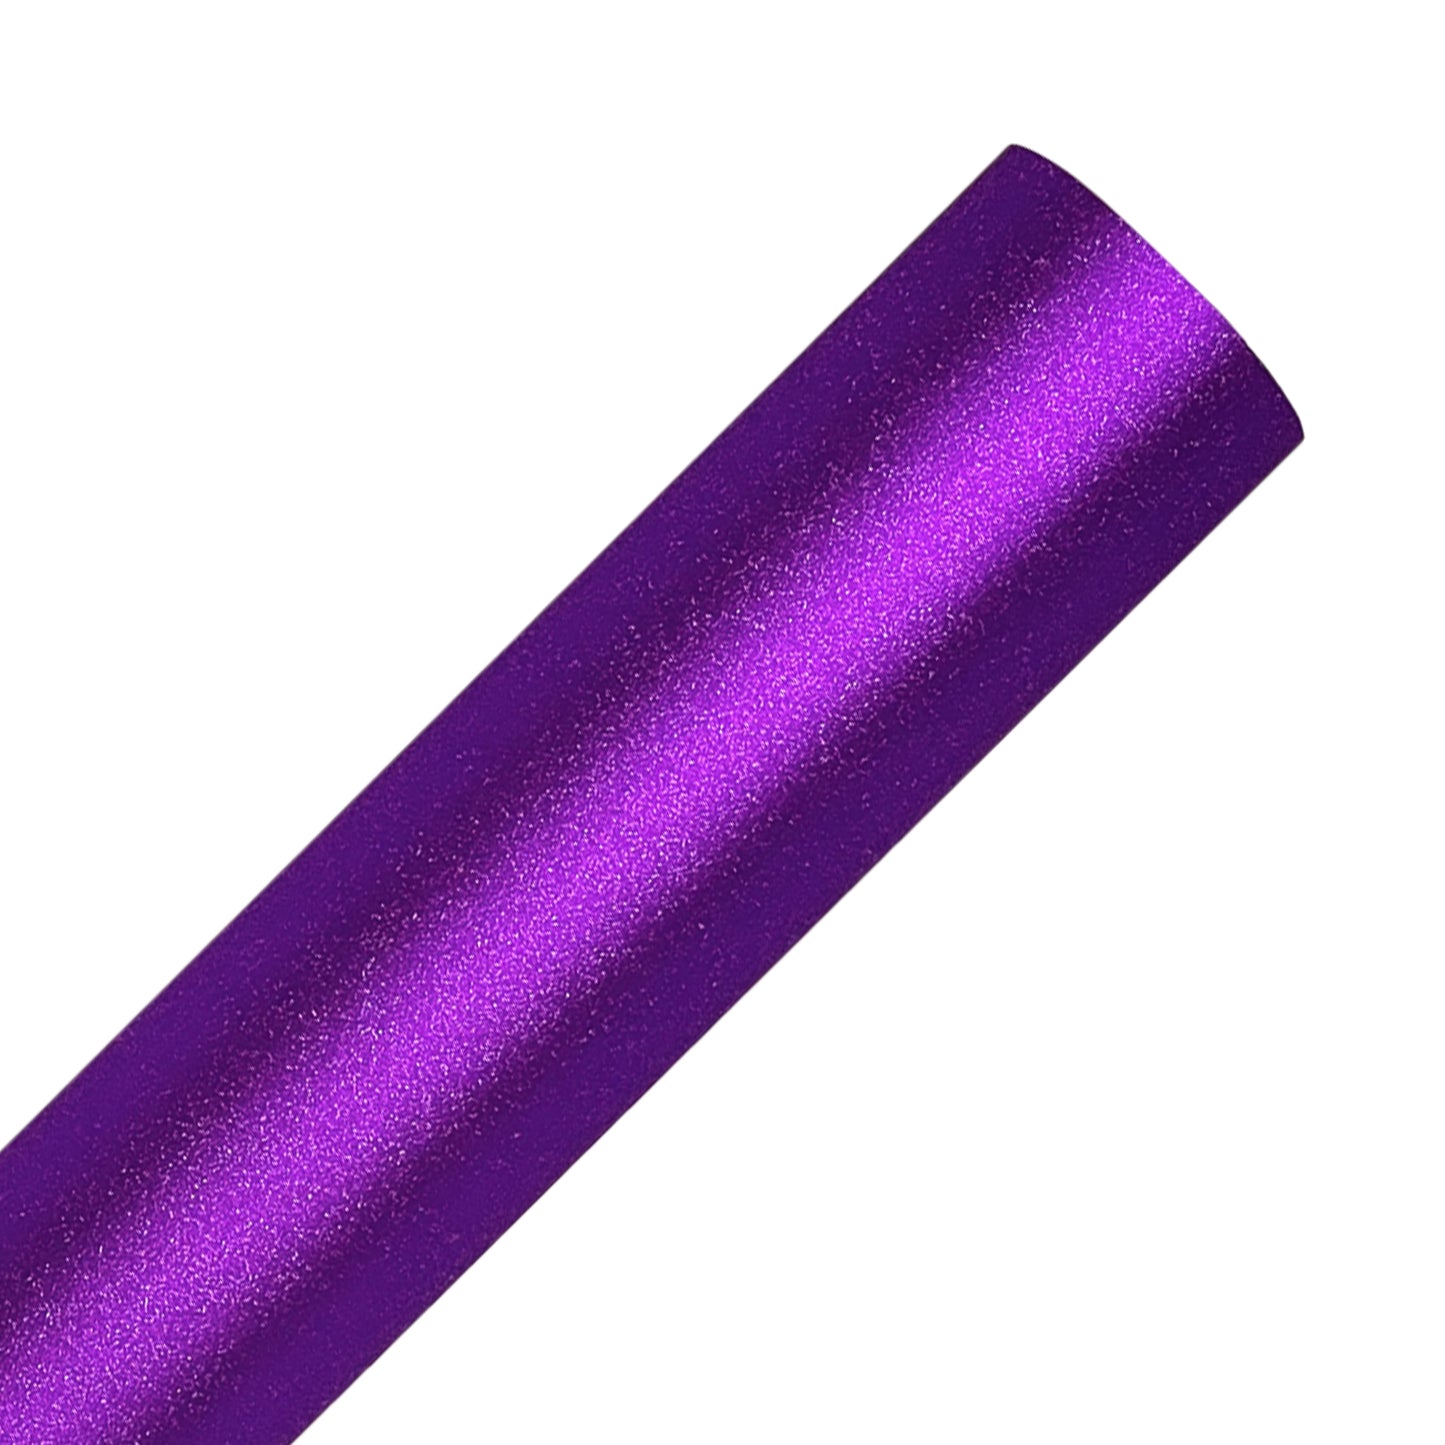 Purple Glitter Adhesive Vinyl Sheets By Craftables